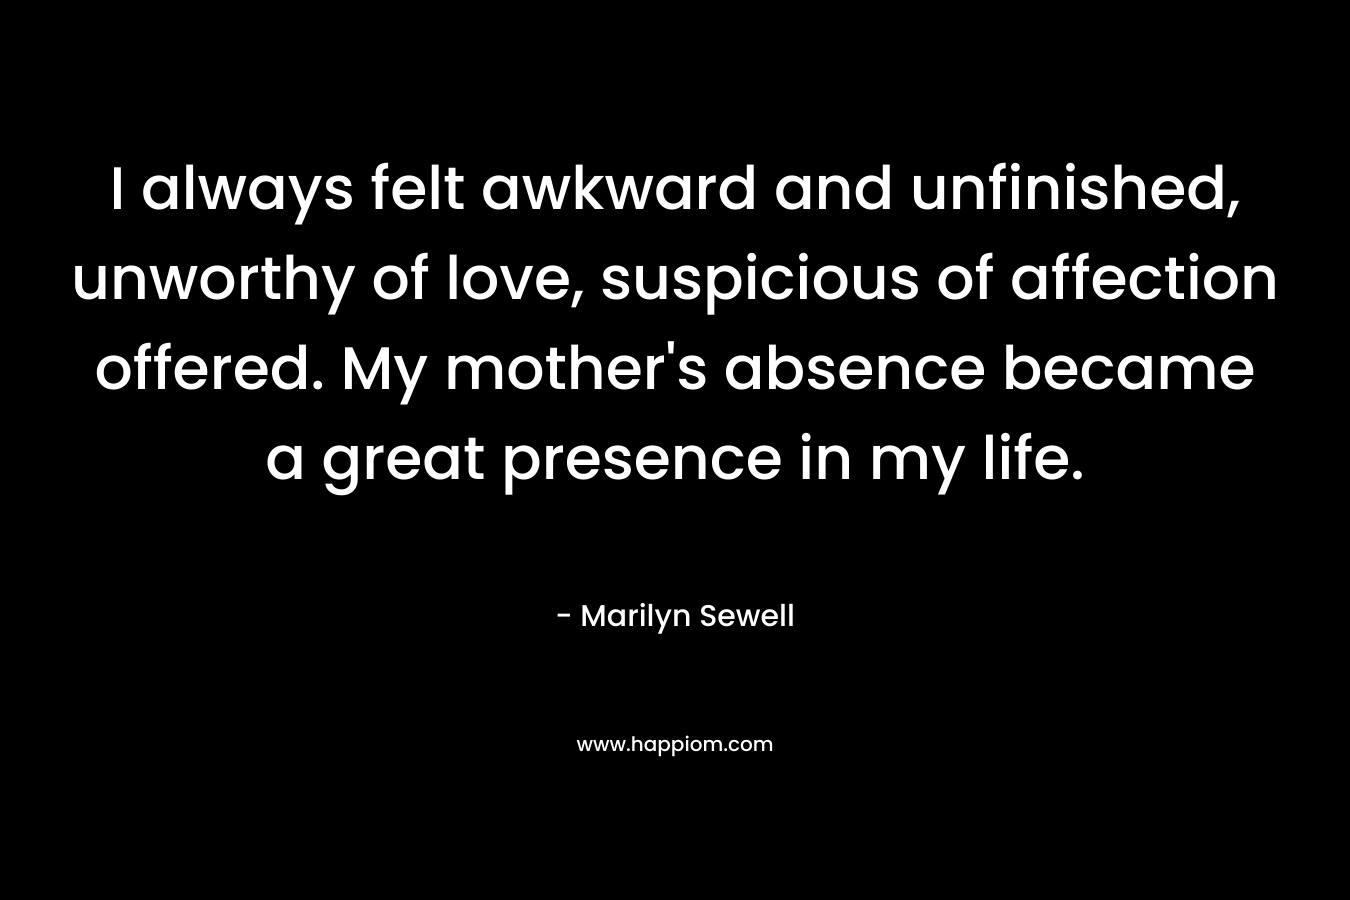 I always felt awkward and unfinished, unworthy of love, suspicious of affection offered. My mother’s absence became a great presence in my life. – Marilyn Sewell